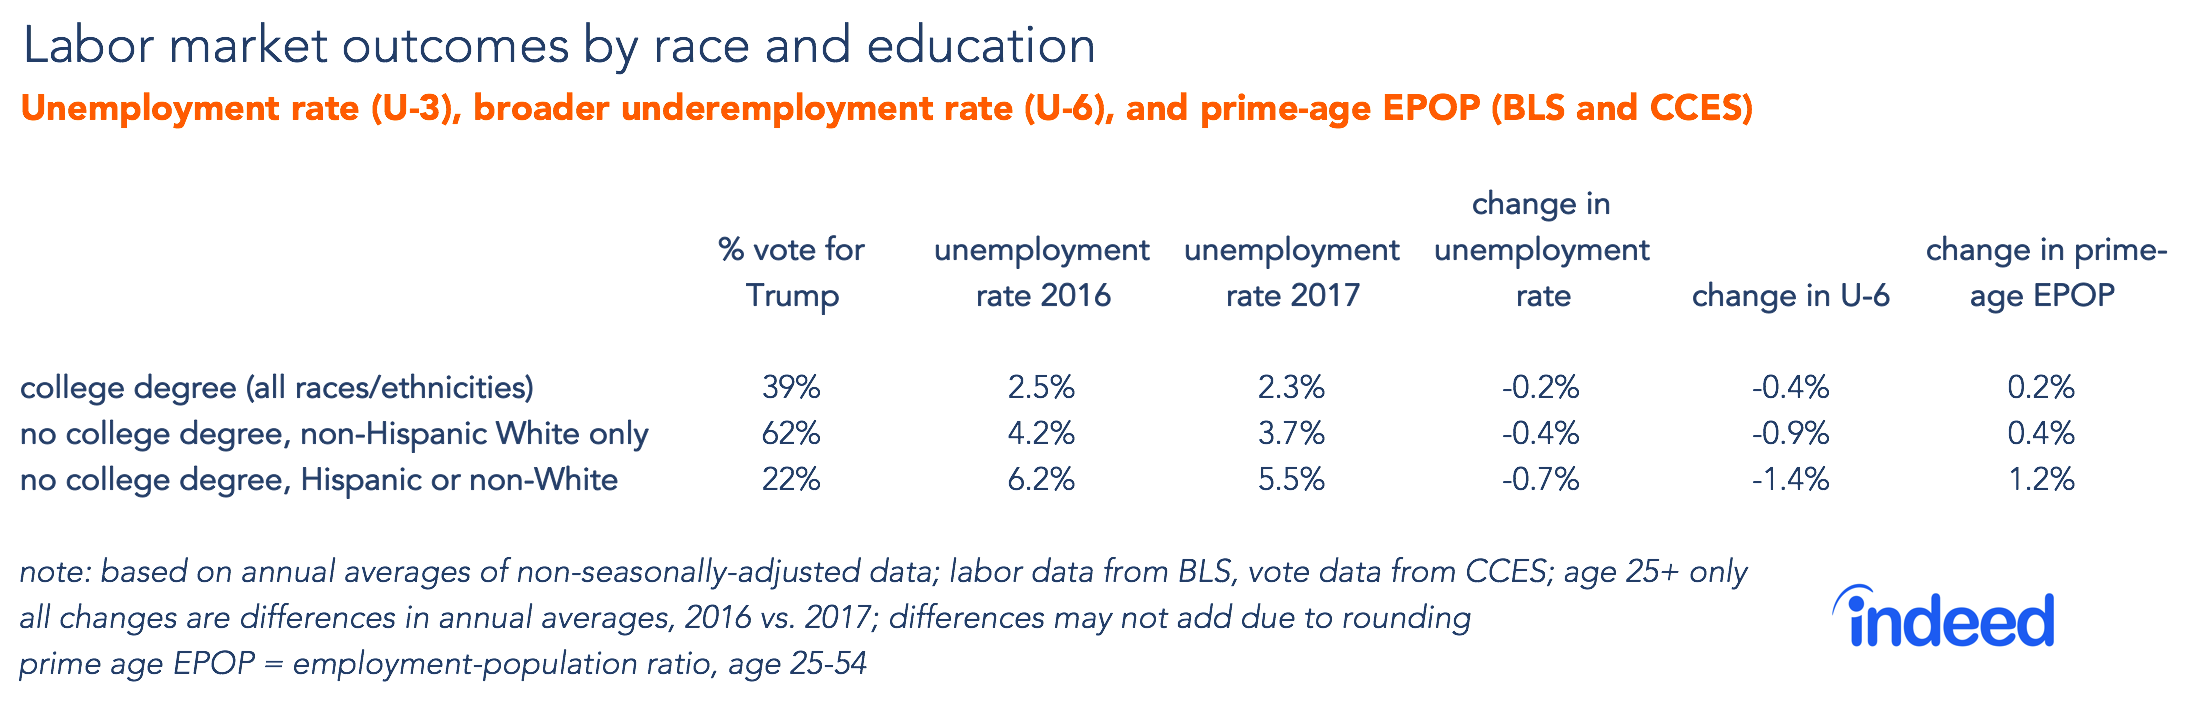 Table shows labor market outcomes by race and education.